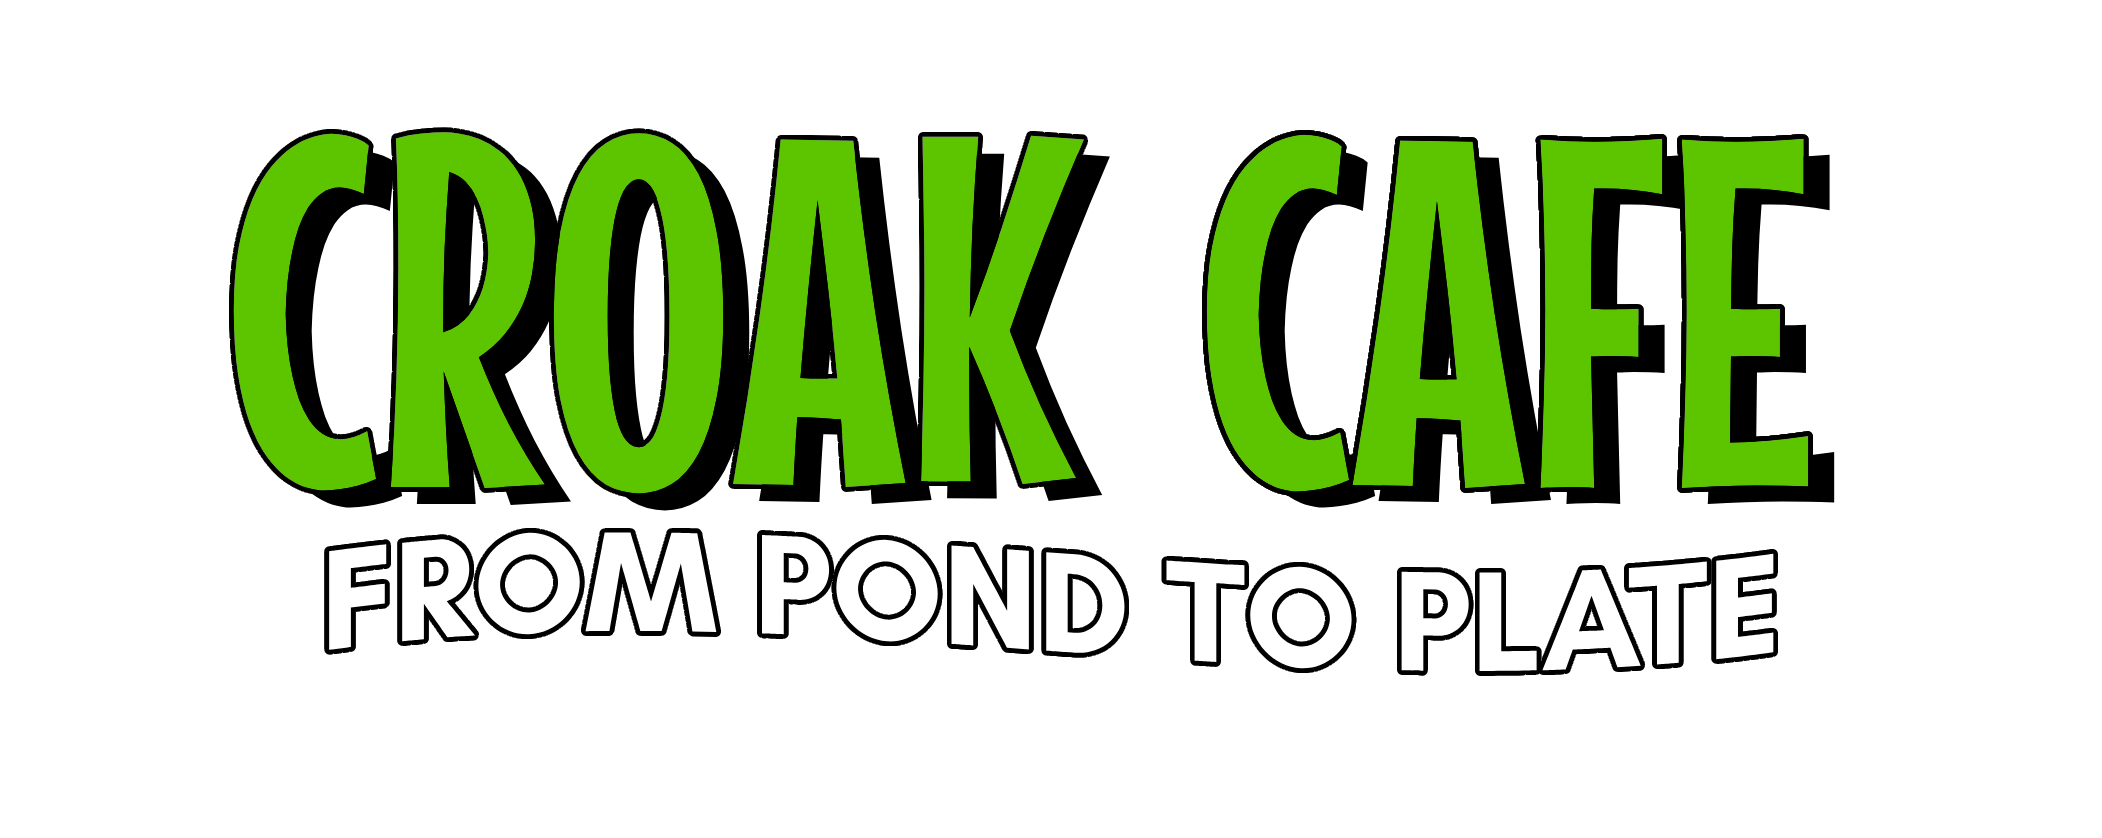 CROAK CAFE: FROM POND TO PLATE